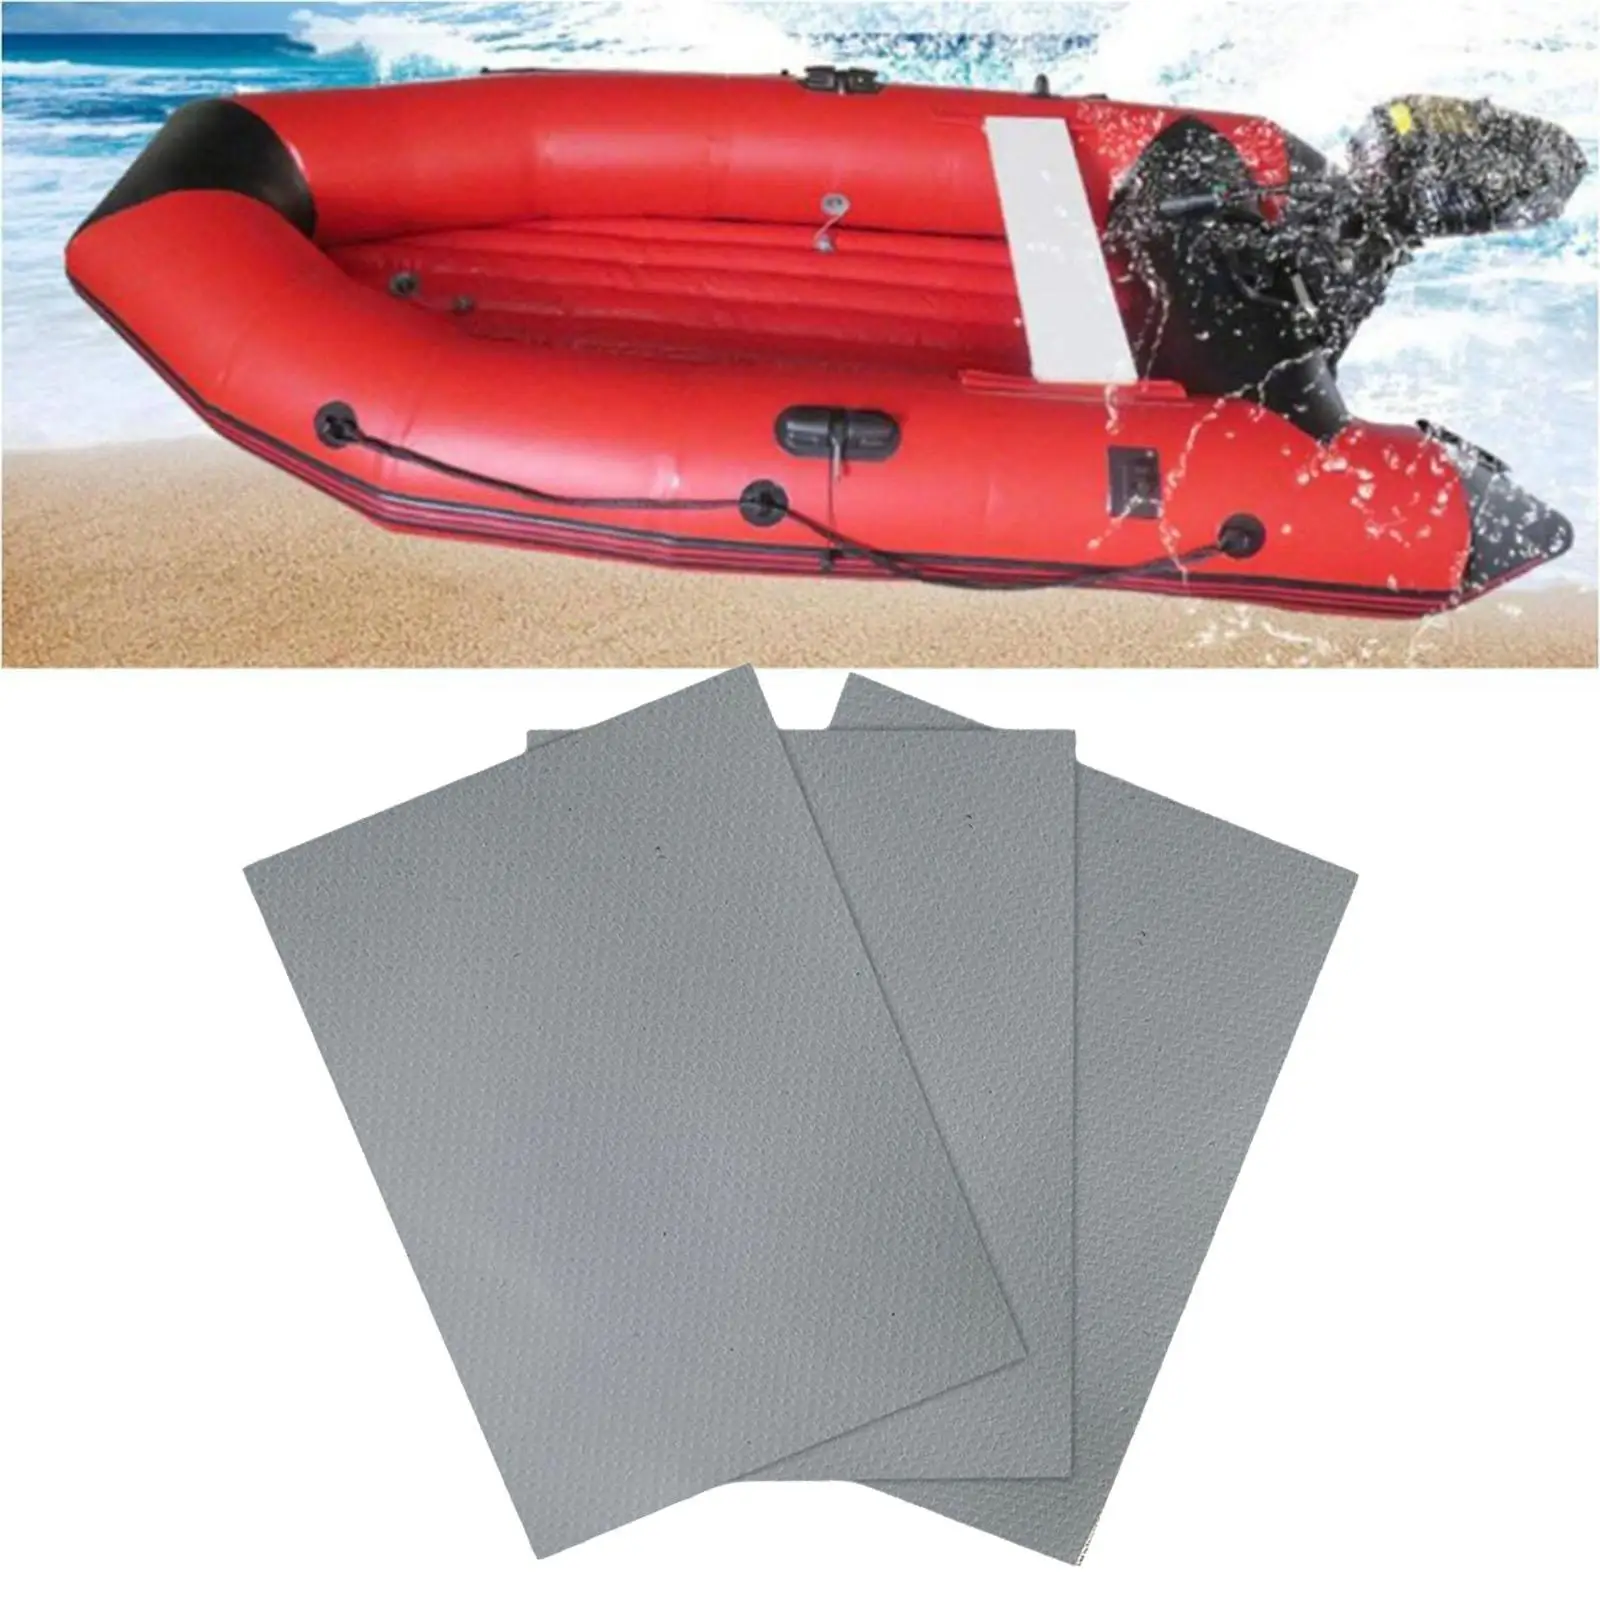 3Pcs PVC Fabric Repair Patches Dinghy  Boats Inflatable Boat Repair